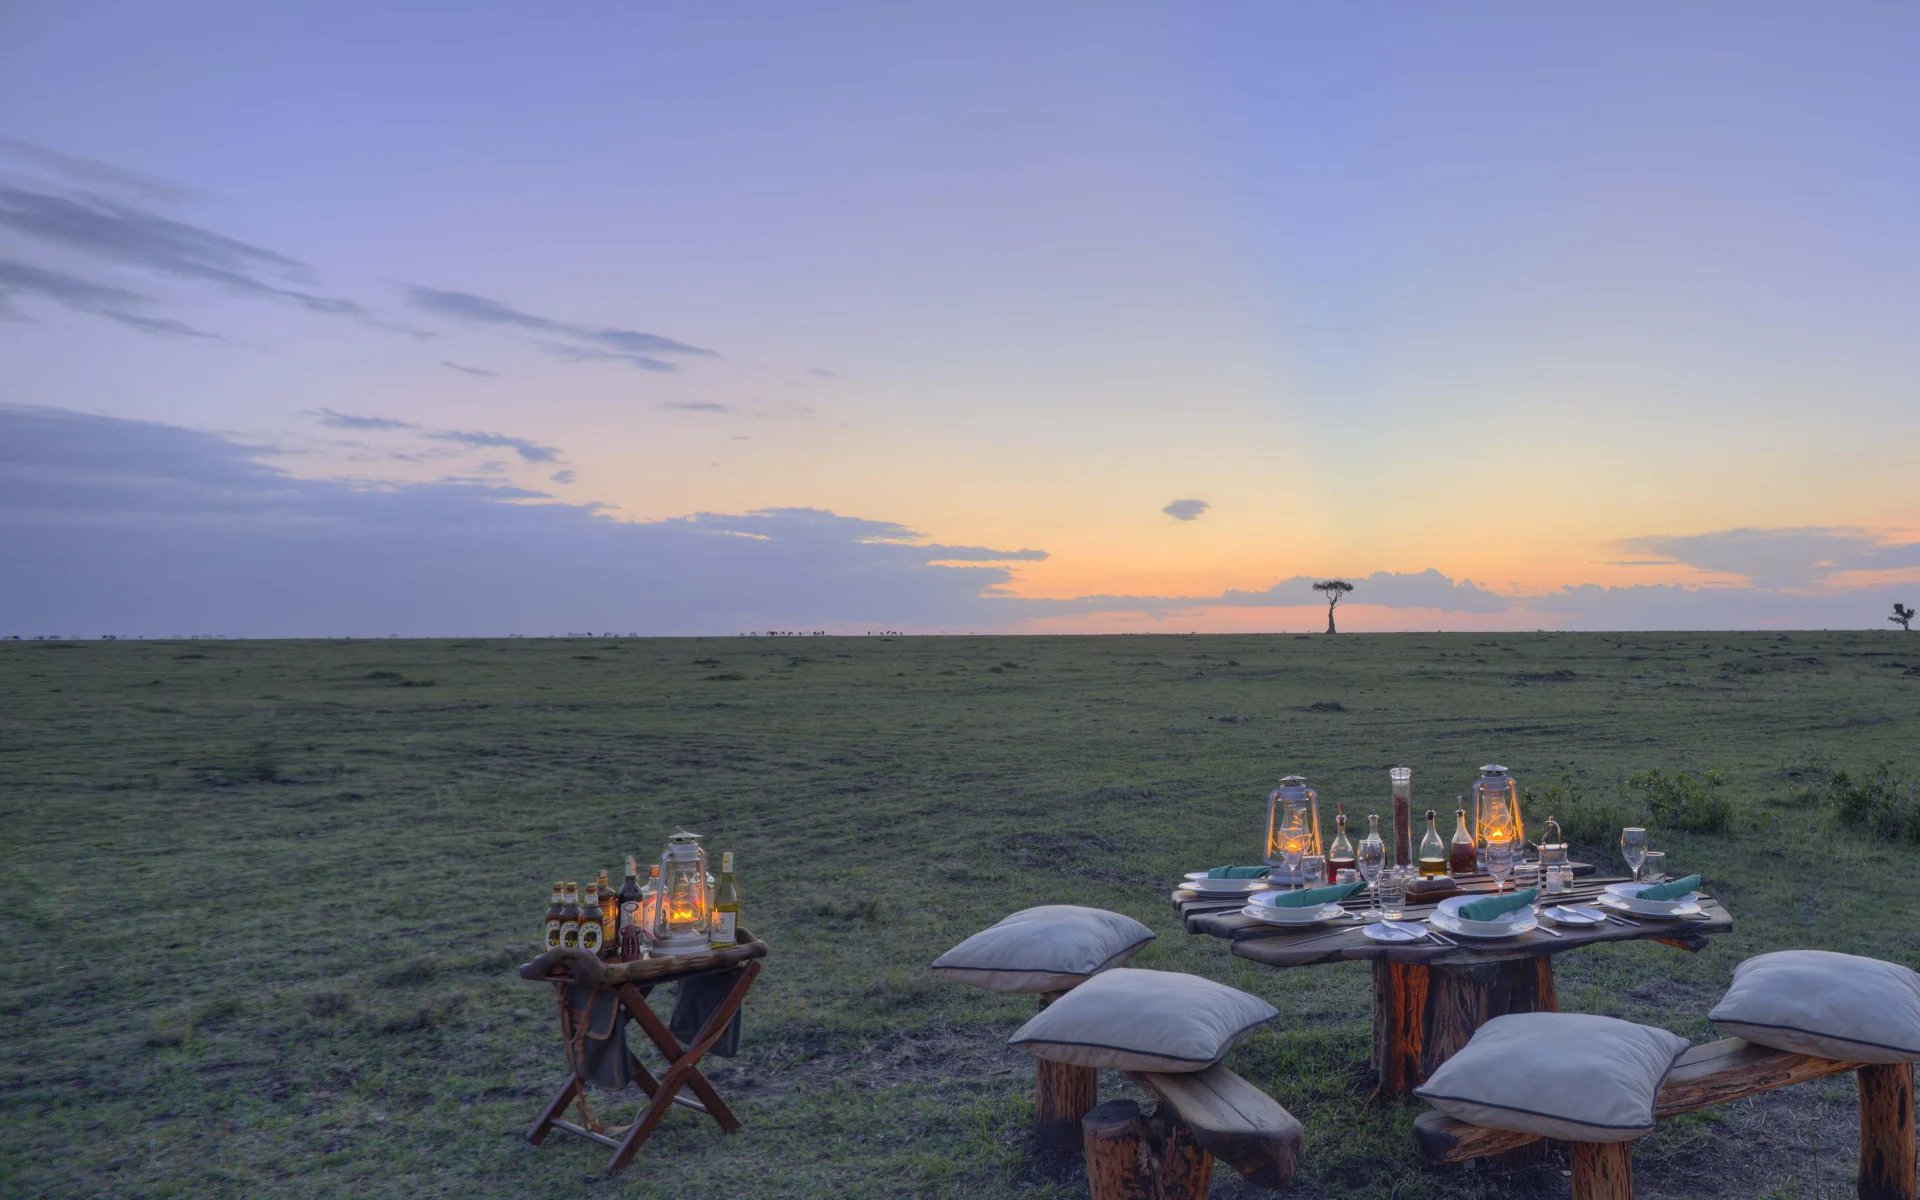 A private dining arrangement is set up ahead of an orange sunset on the Masai Mara plains.